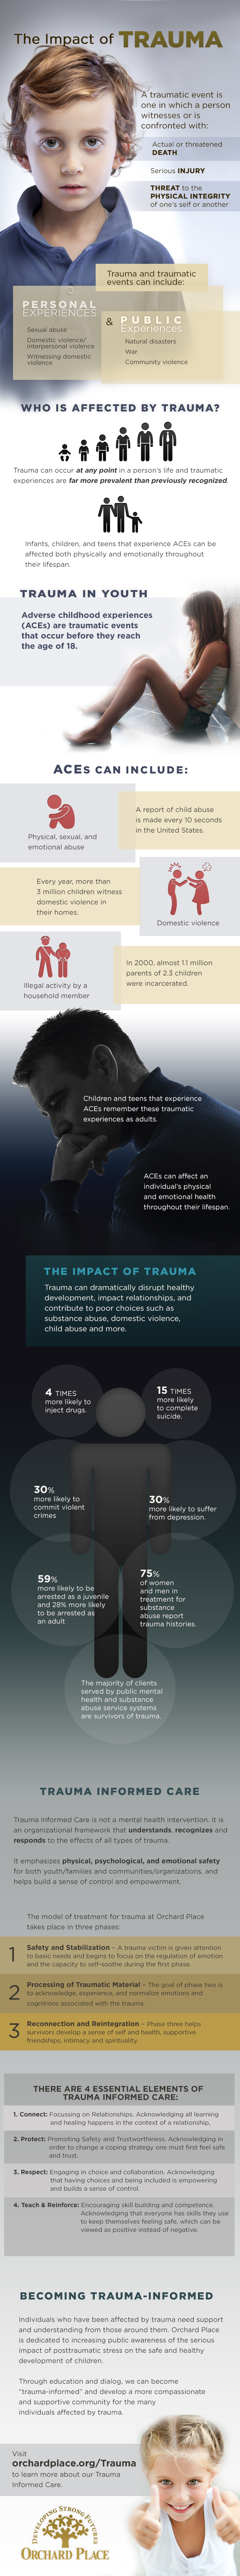 orchard place trauma informed care infographic